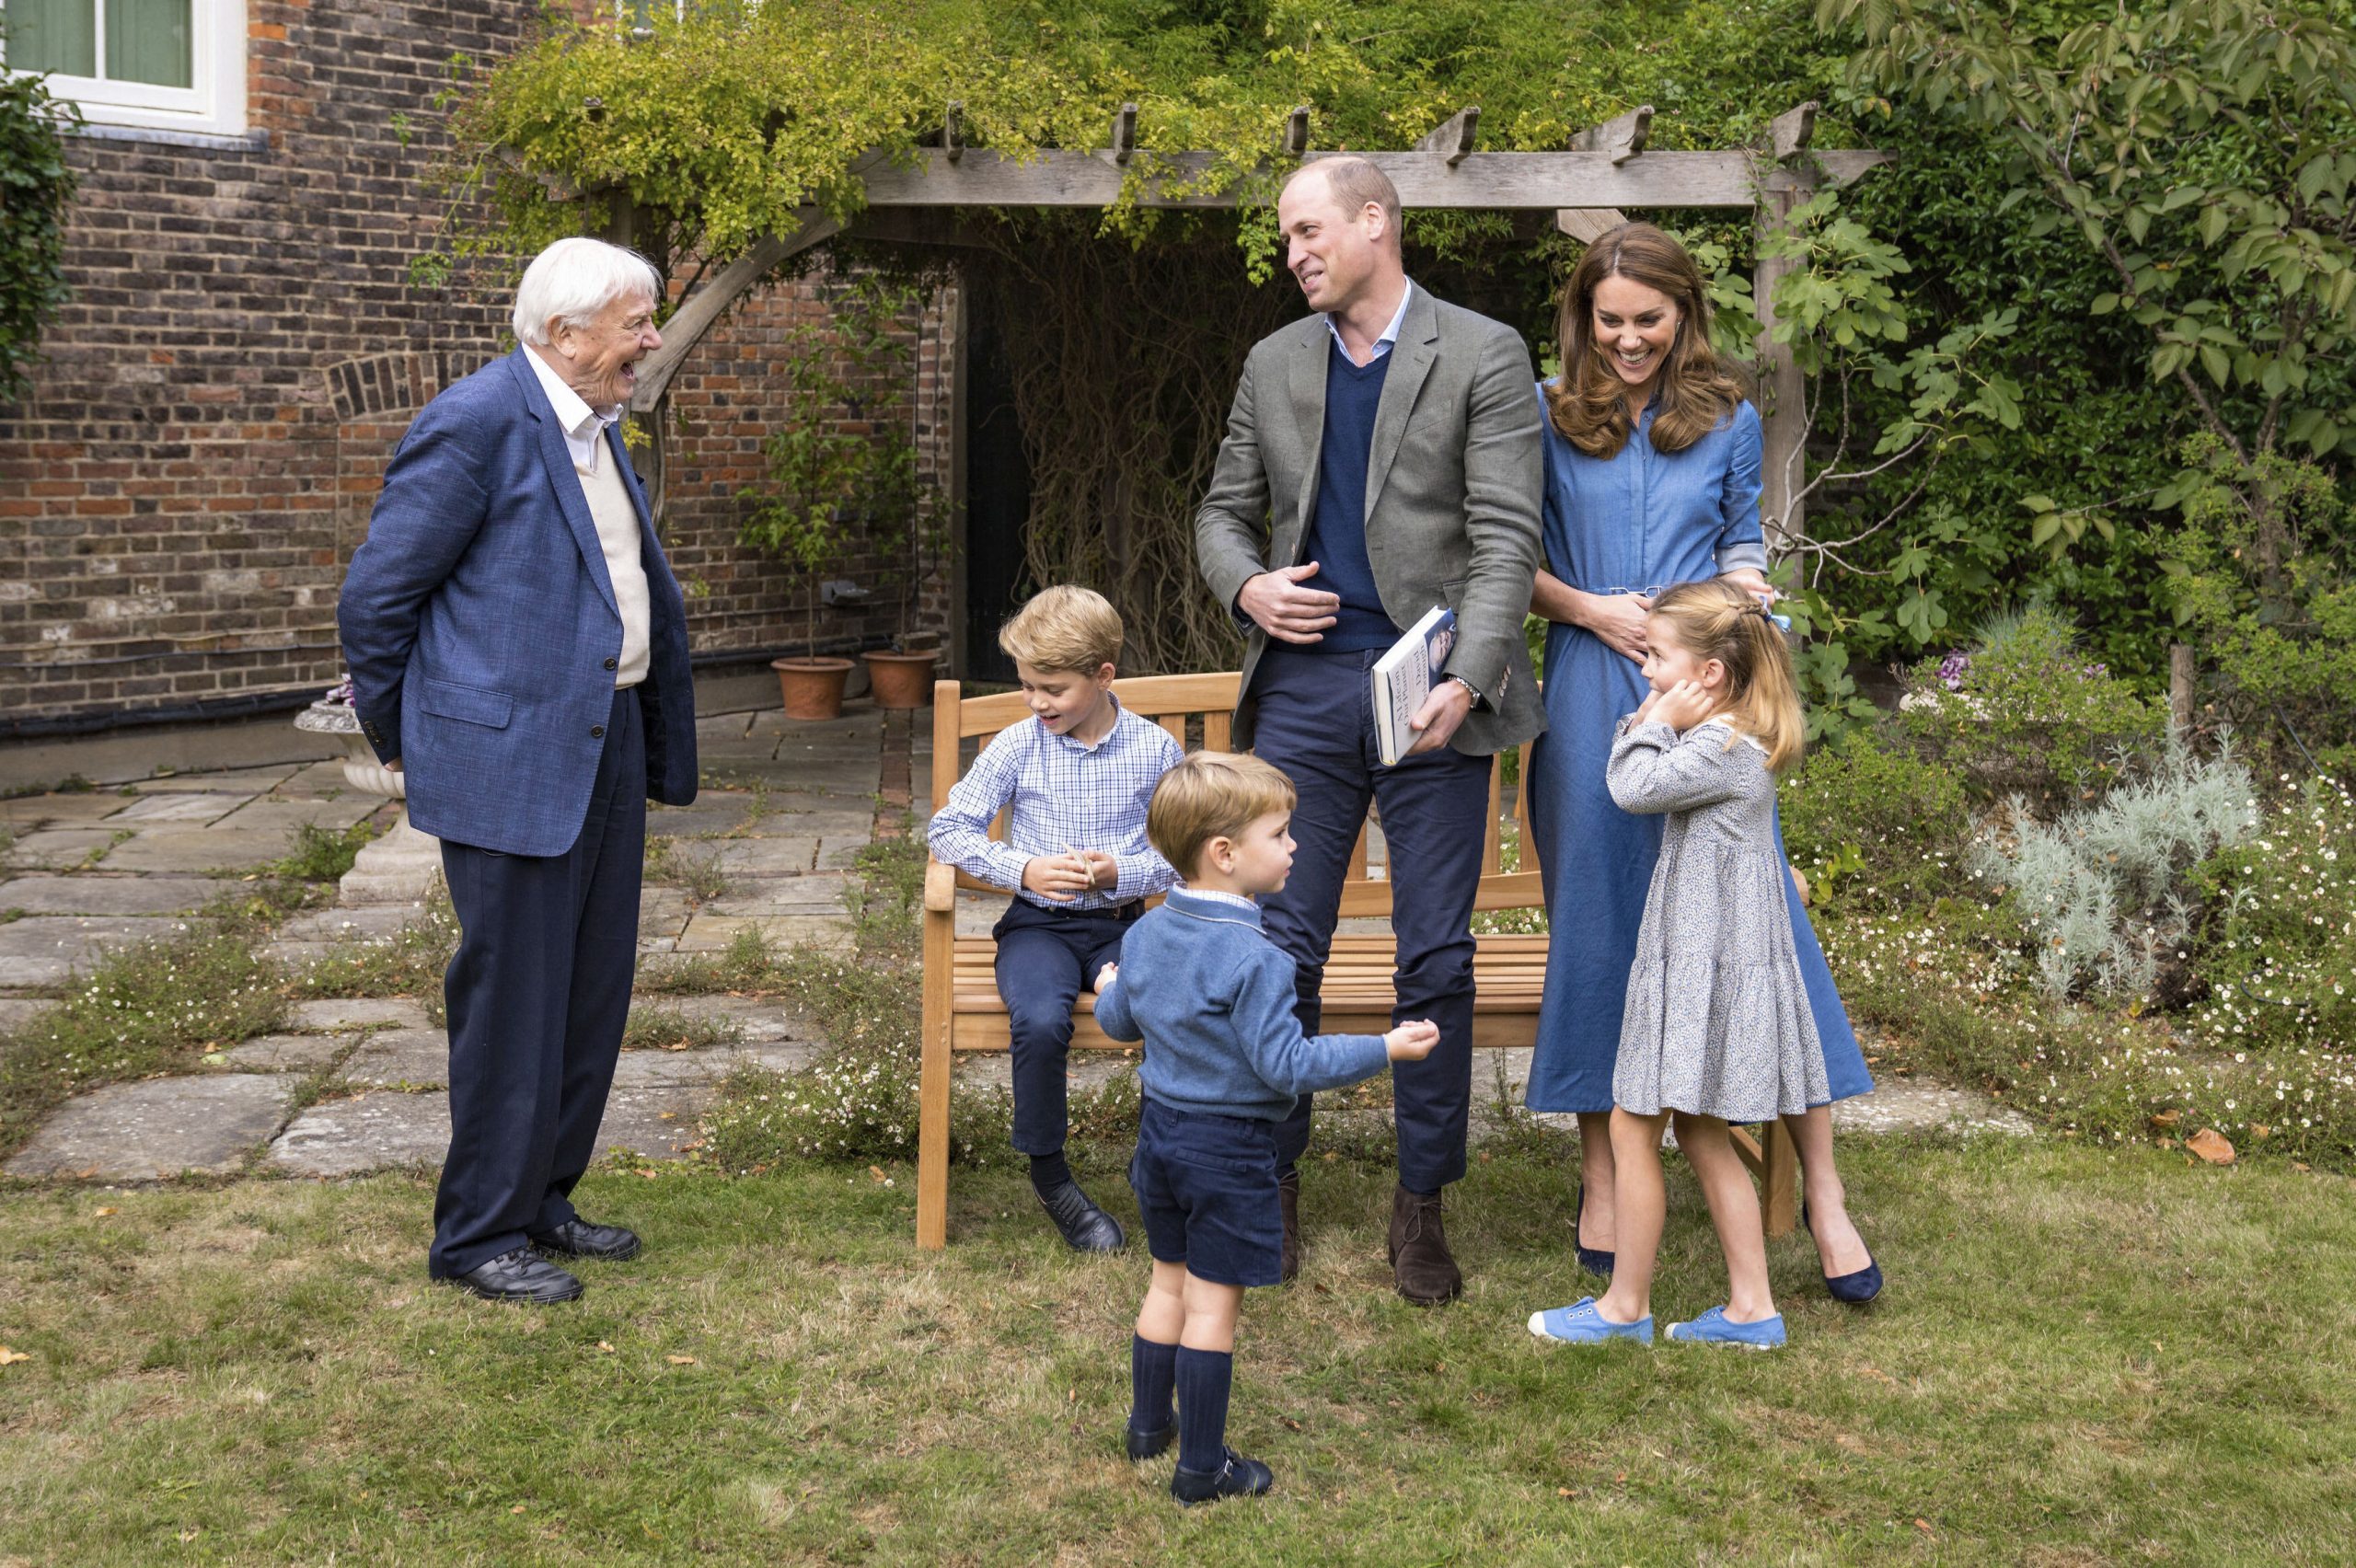 Malta demand shark tooth presented to Prince George by David Attenborough